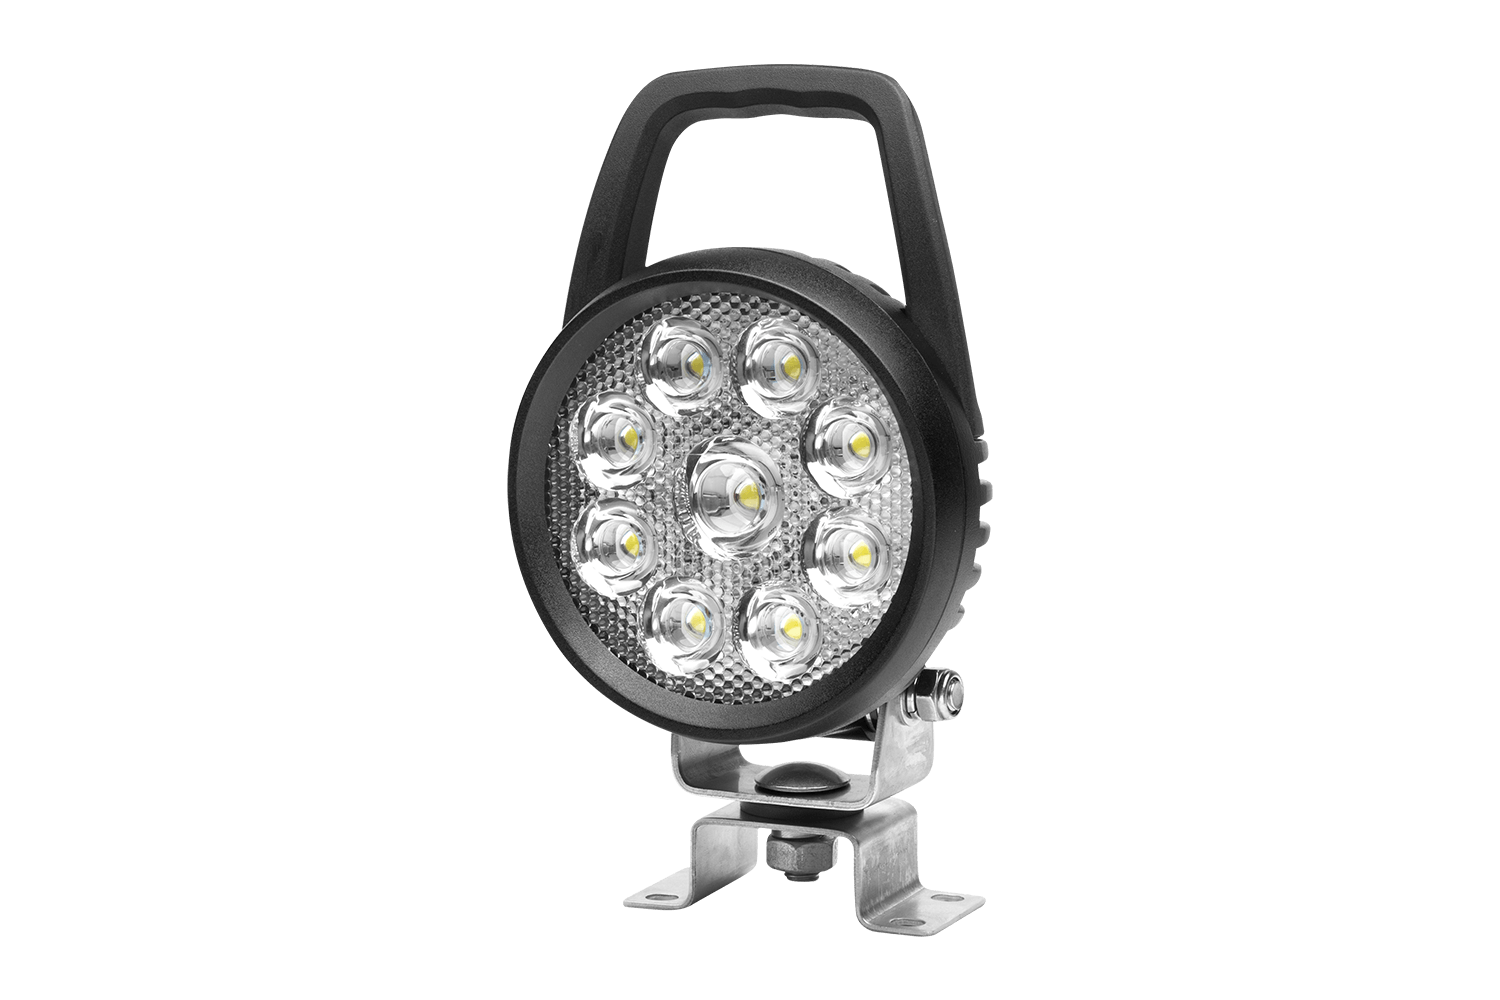 R120S special purpose work lamp from Hella offered by Patlon